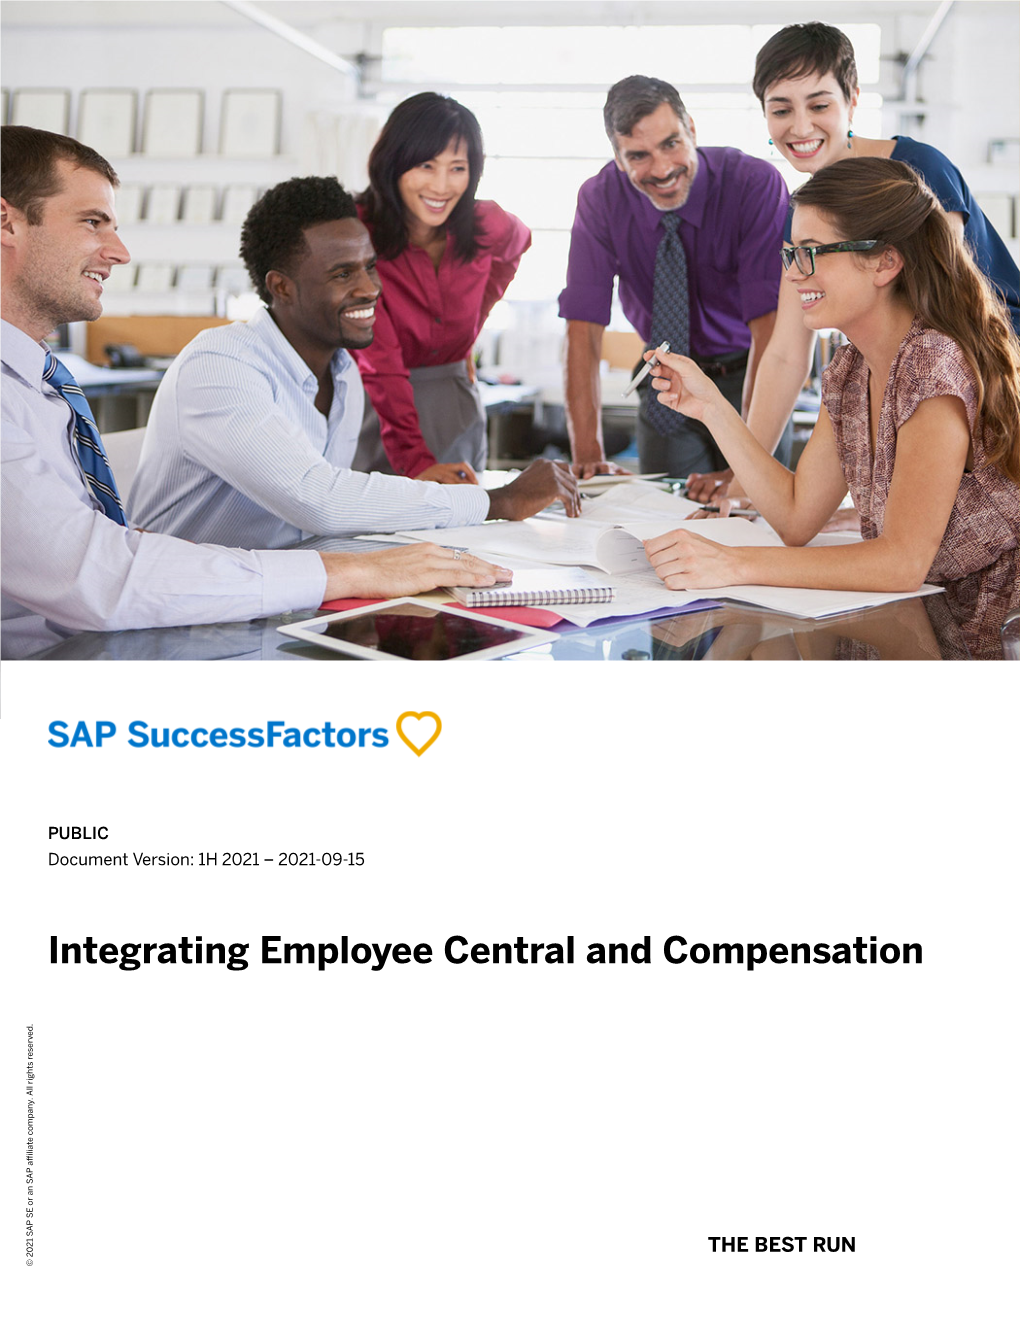 Integrating Employee Central and Compensation Company